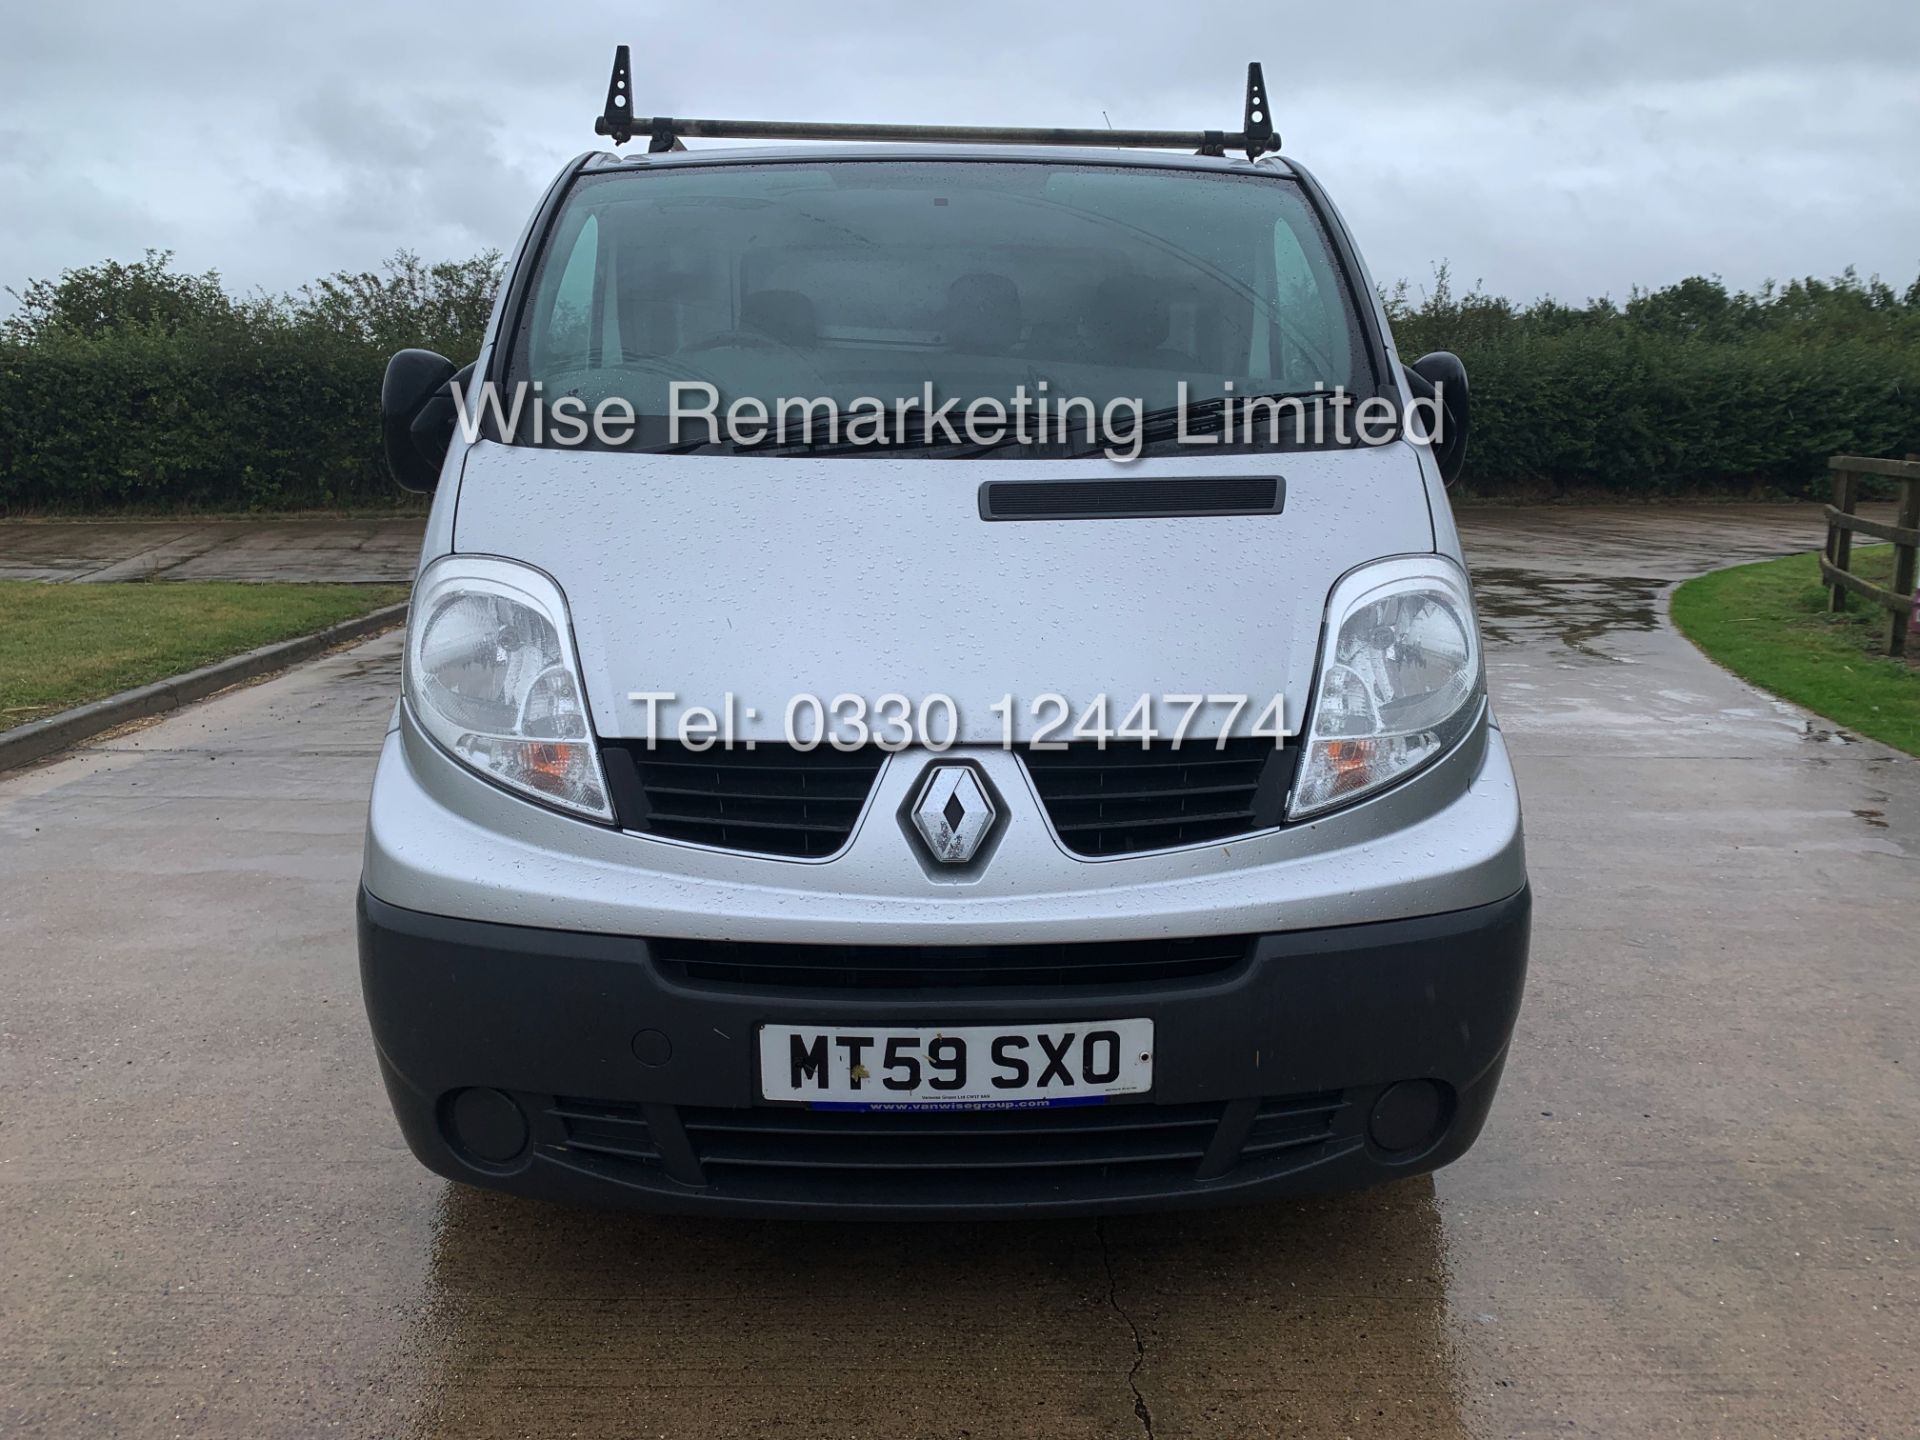 RENAULT TRAFFIC 2.0L DCI 115 (2010 MODEL) *AIR CON* NO VAT SAVE 20% - Image 6 of 16